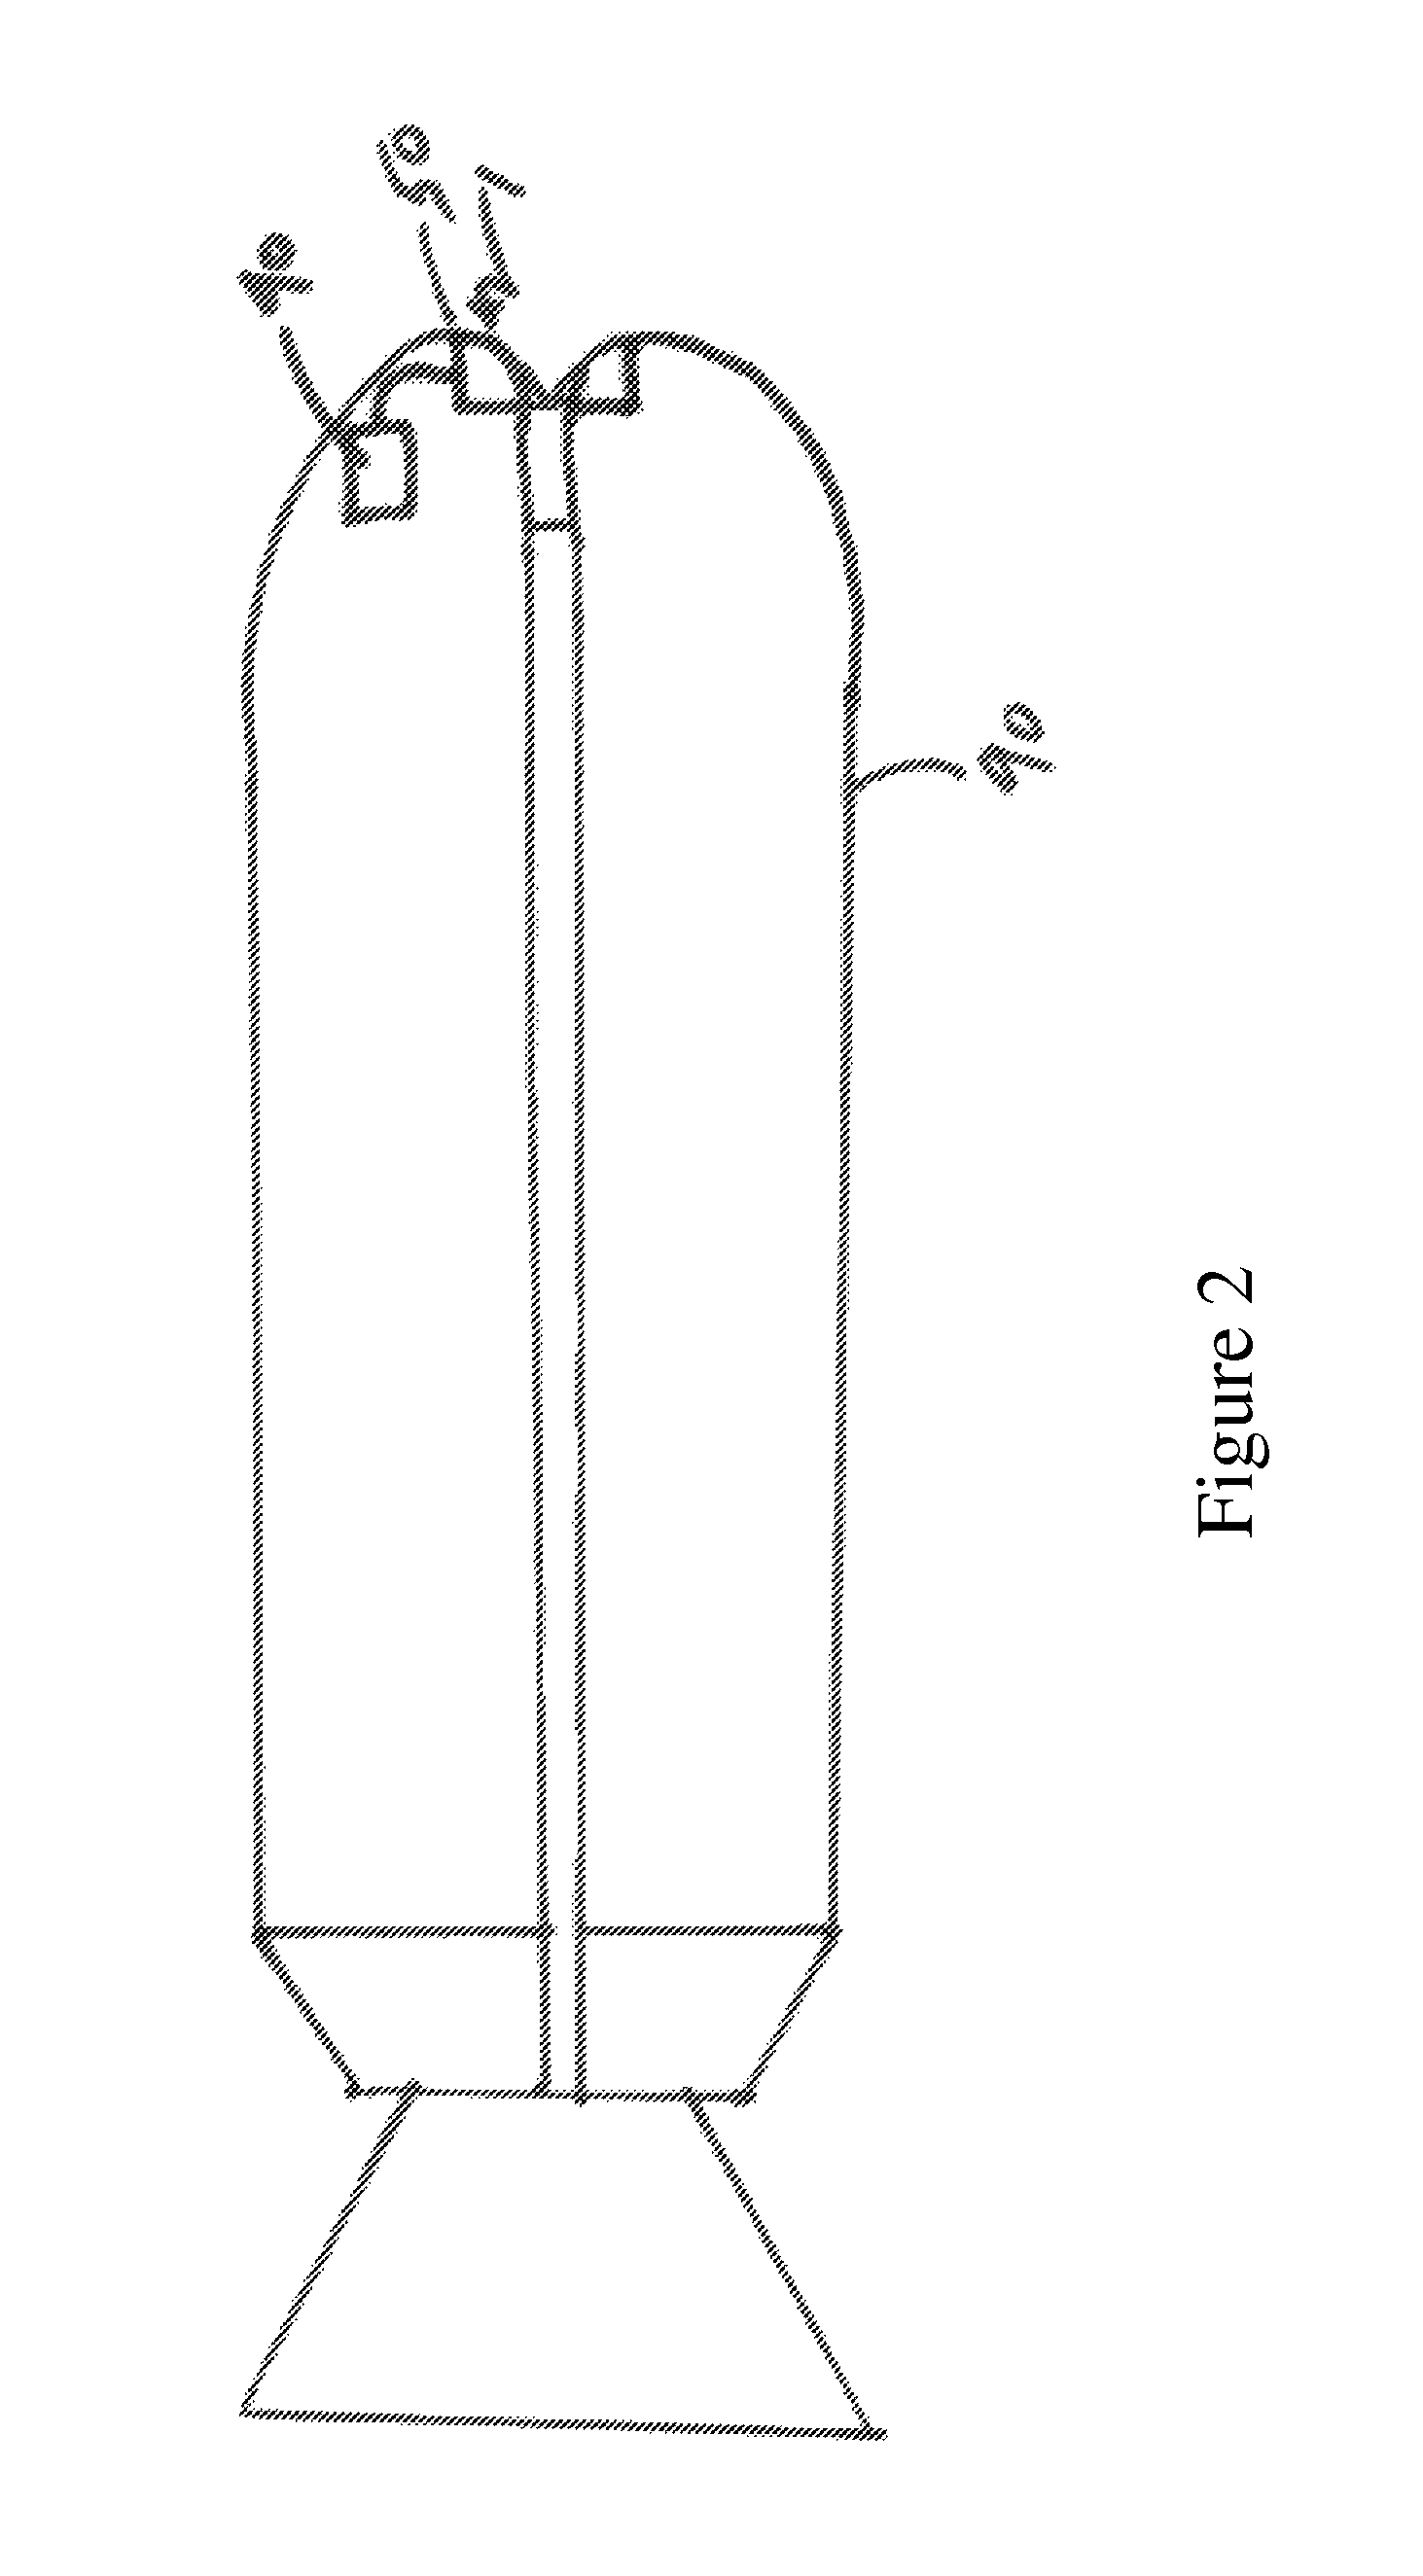 Apparatus and methods for hypersonic nosecone